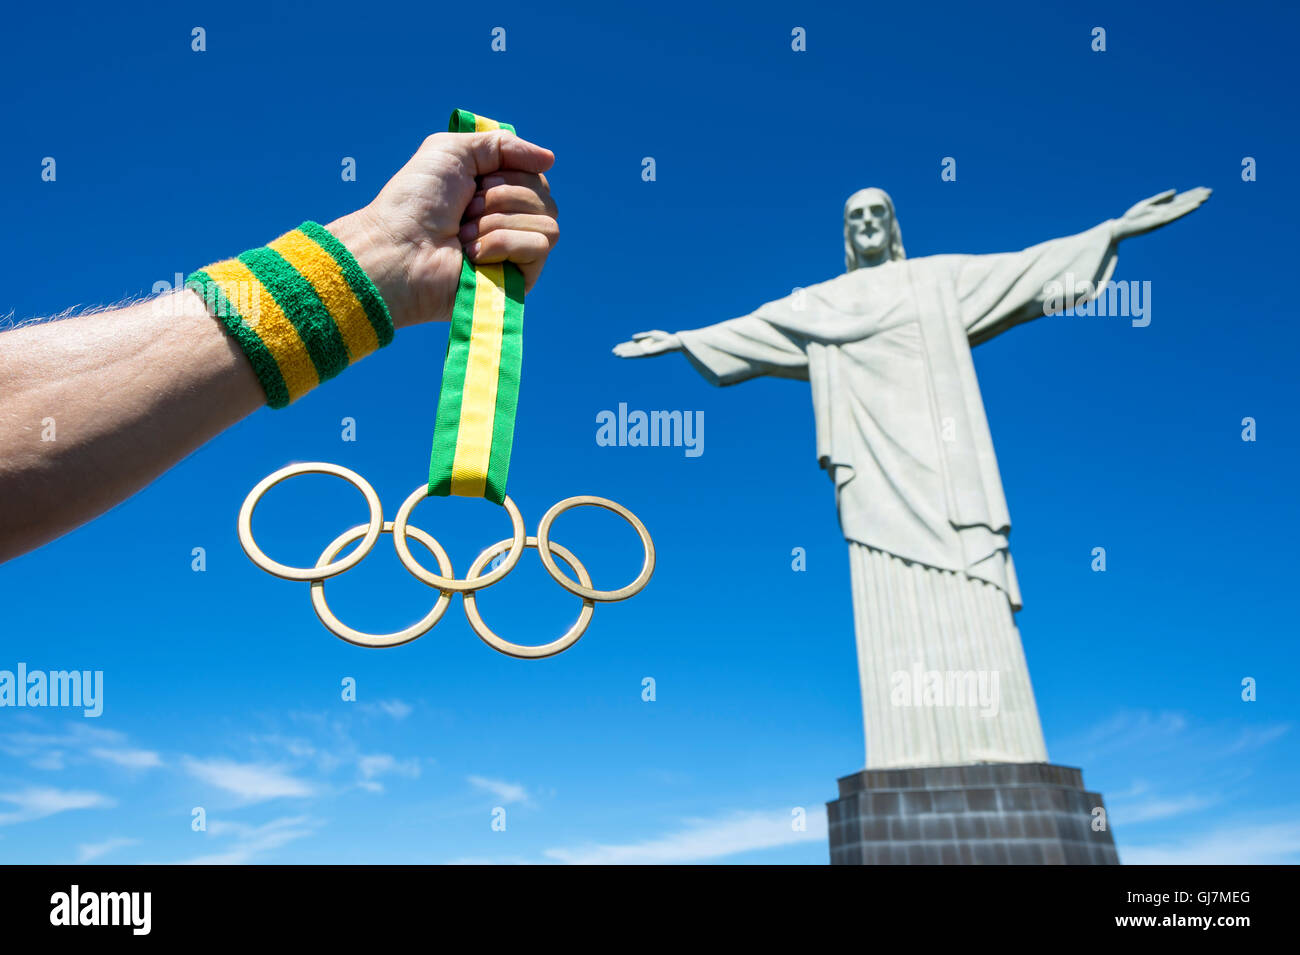 RIO DE JANEIRO - MARCH 21, 2016: Hand holding Olympic rings gold medal hanging from ribbon in clear blue sky next to Corcovado. Stock Photo